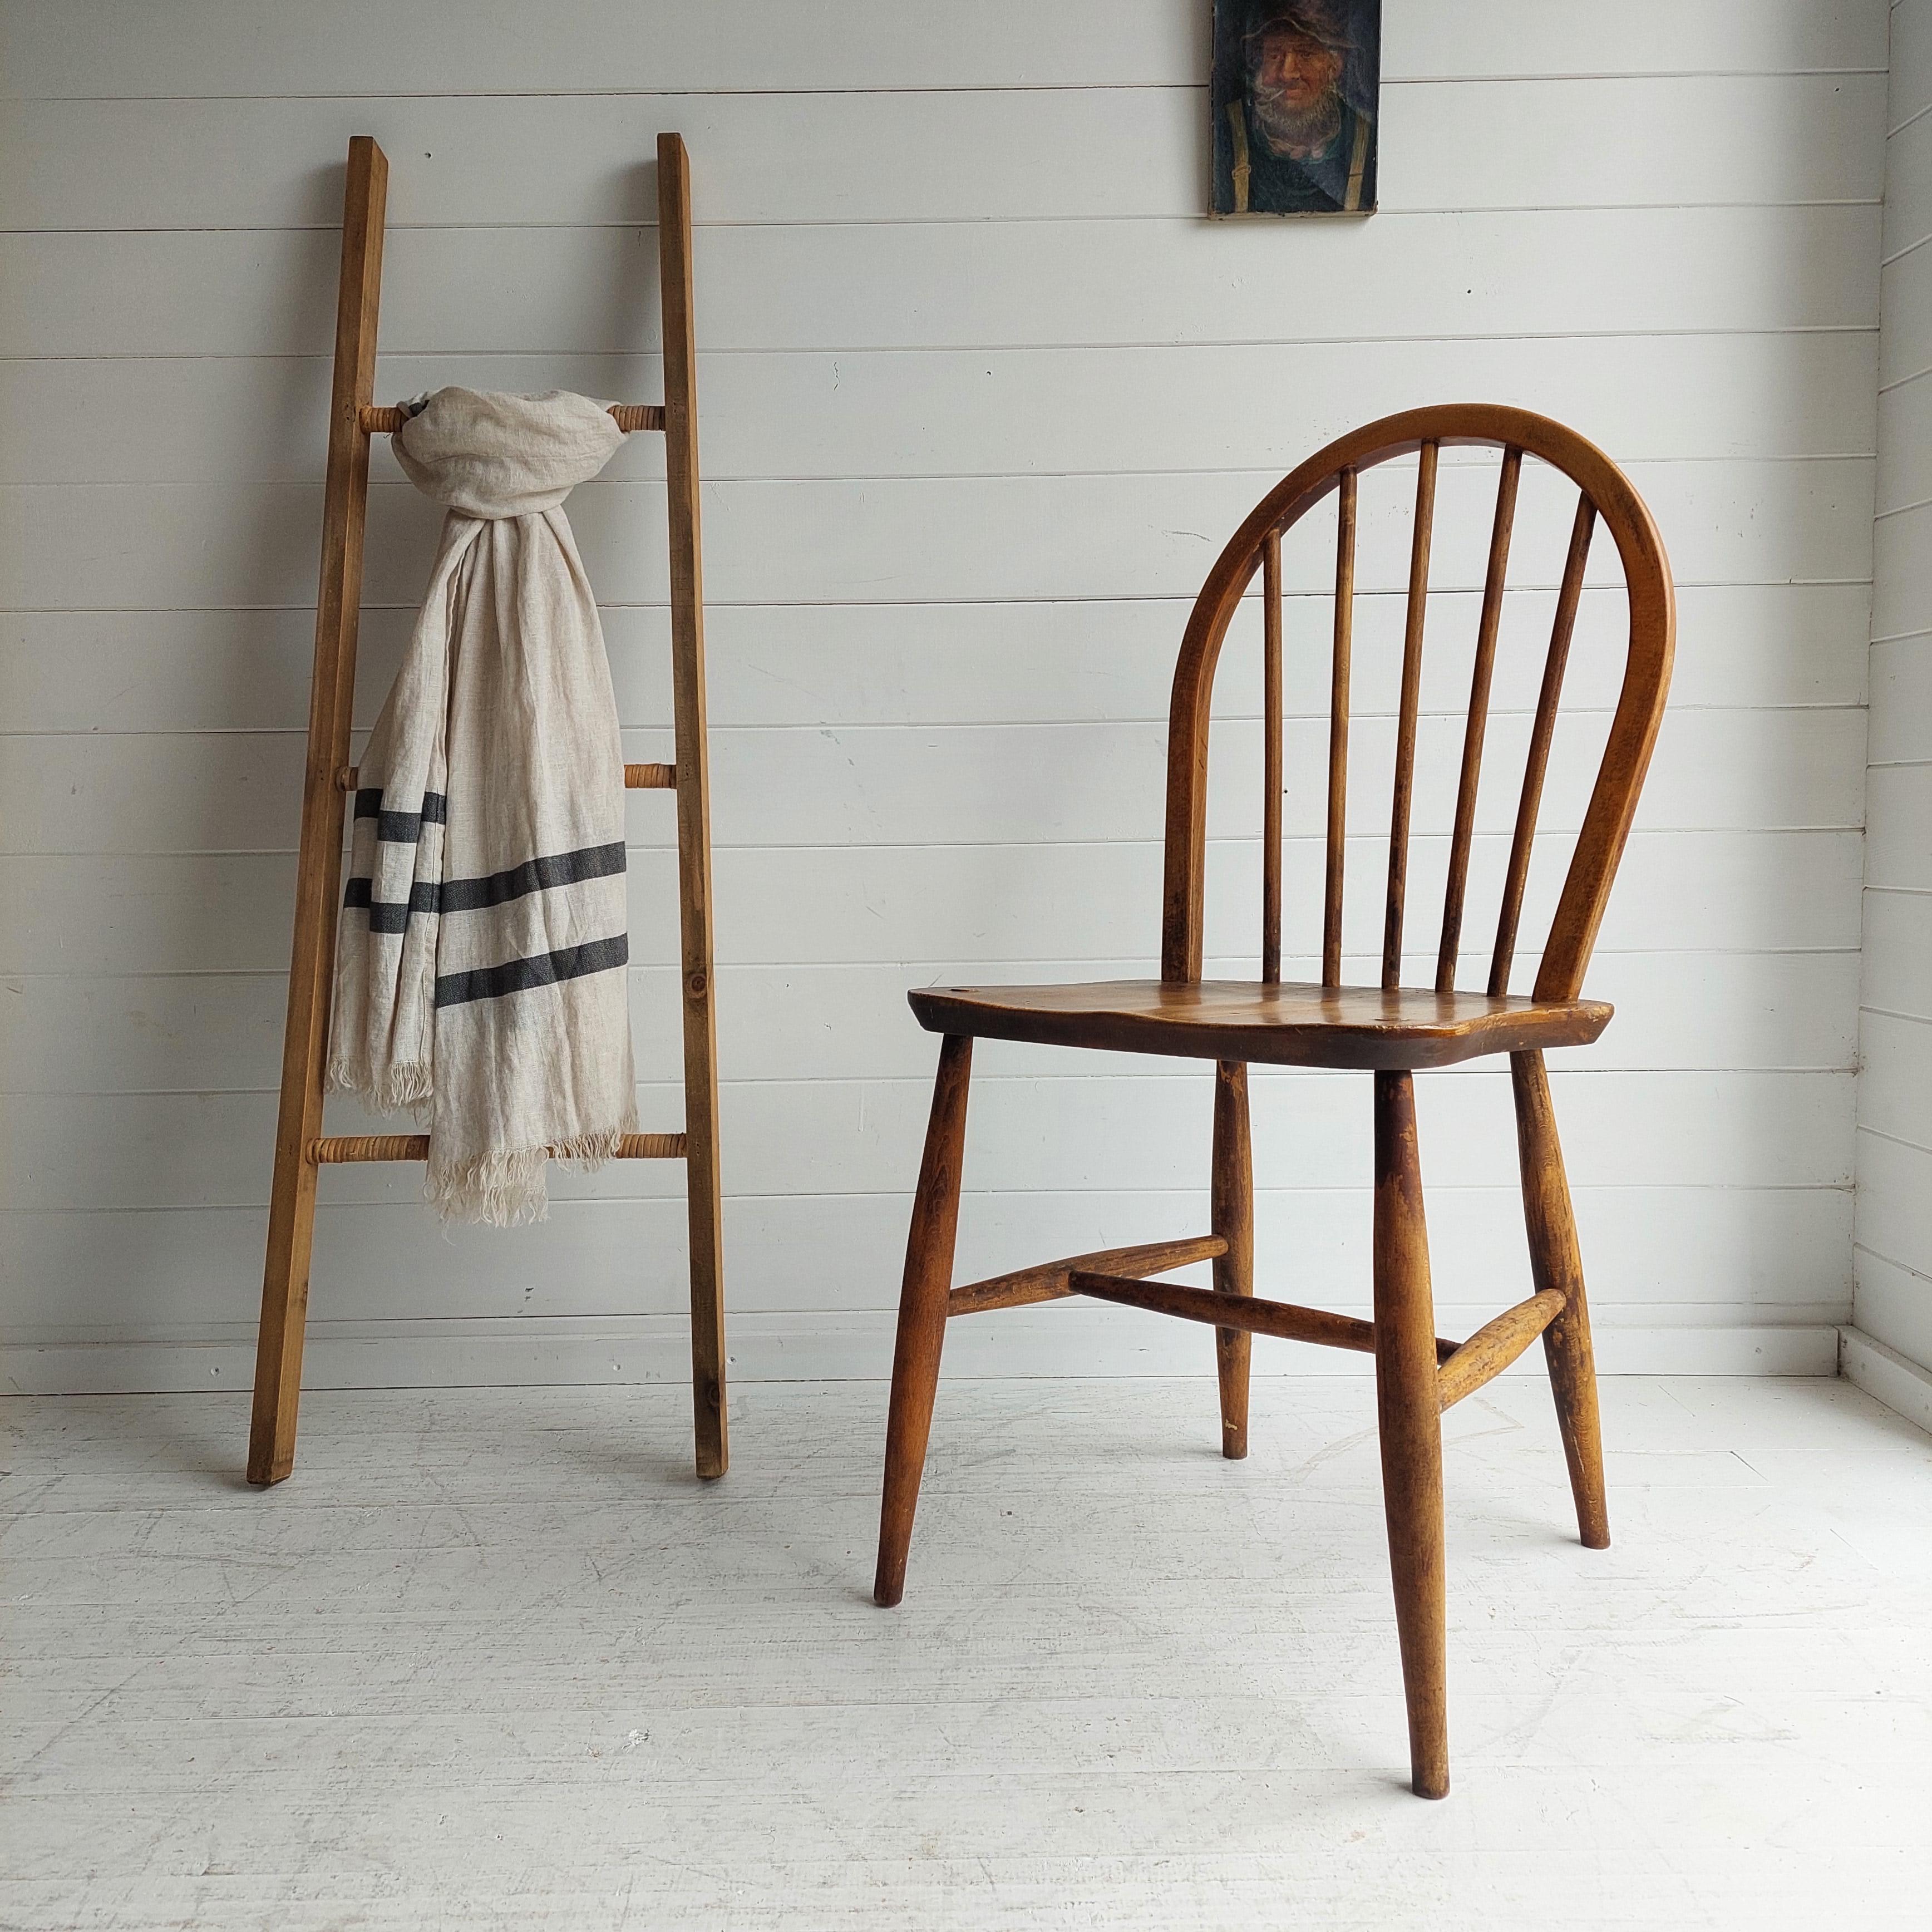 Ercol Windsor Kitchen chair 50s
Vintage Ercol Hoop Back Dining Chair Mid Century 

Ercol are an iconic British furniture company started by Lucian Ercolani, an Italian immigrant and Cabinet Maker in the 1930’s. 
They are known for their elegant